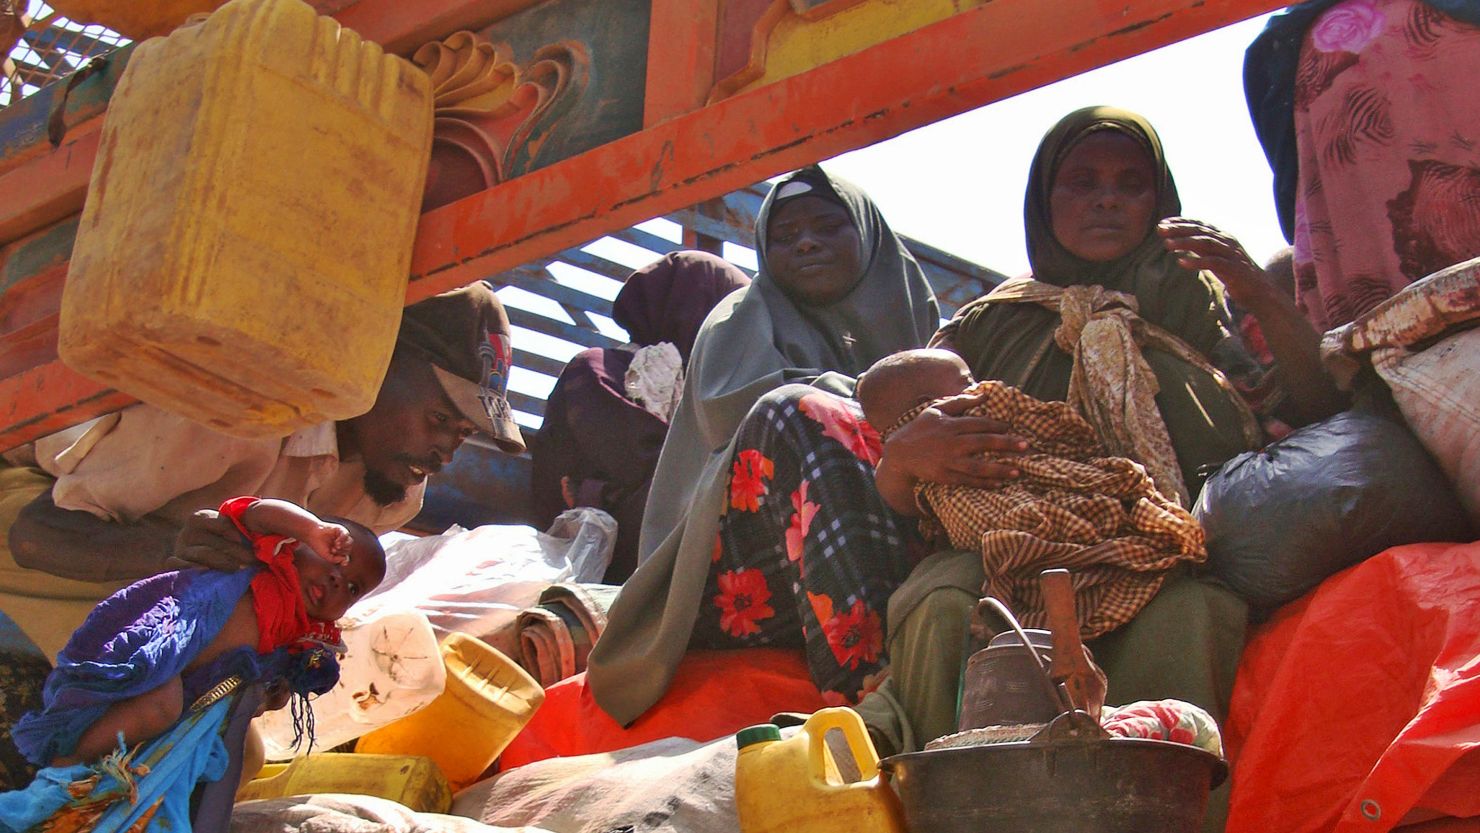 Somalis displaced by famine sit in the back of a truck ready to leave an internally displaced persons camp in Mogadishu Sunday.